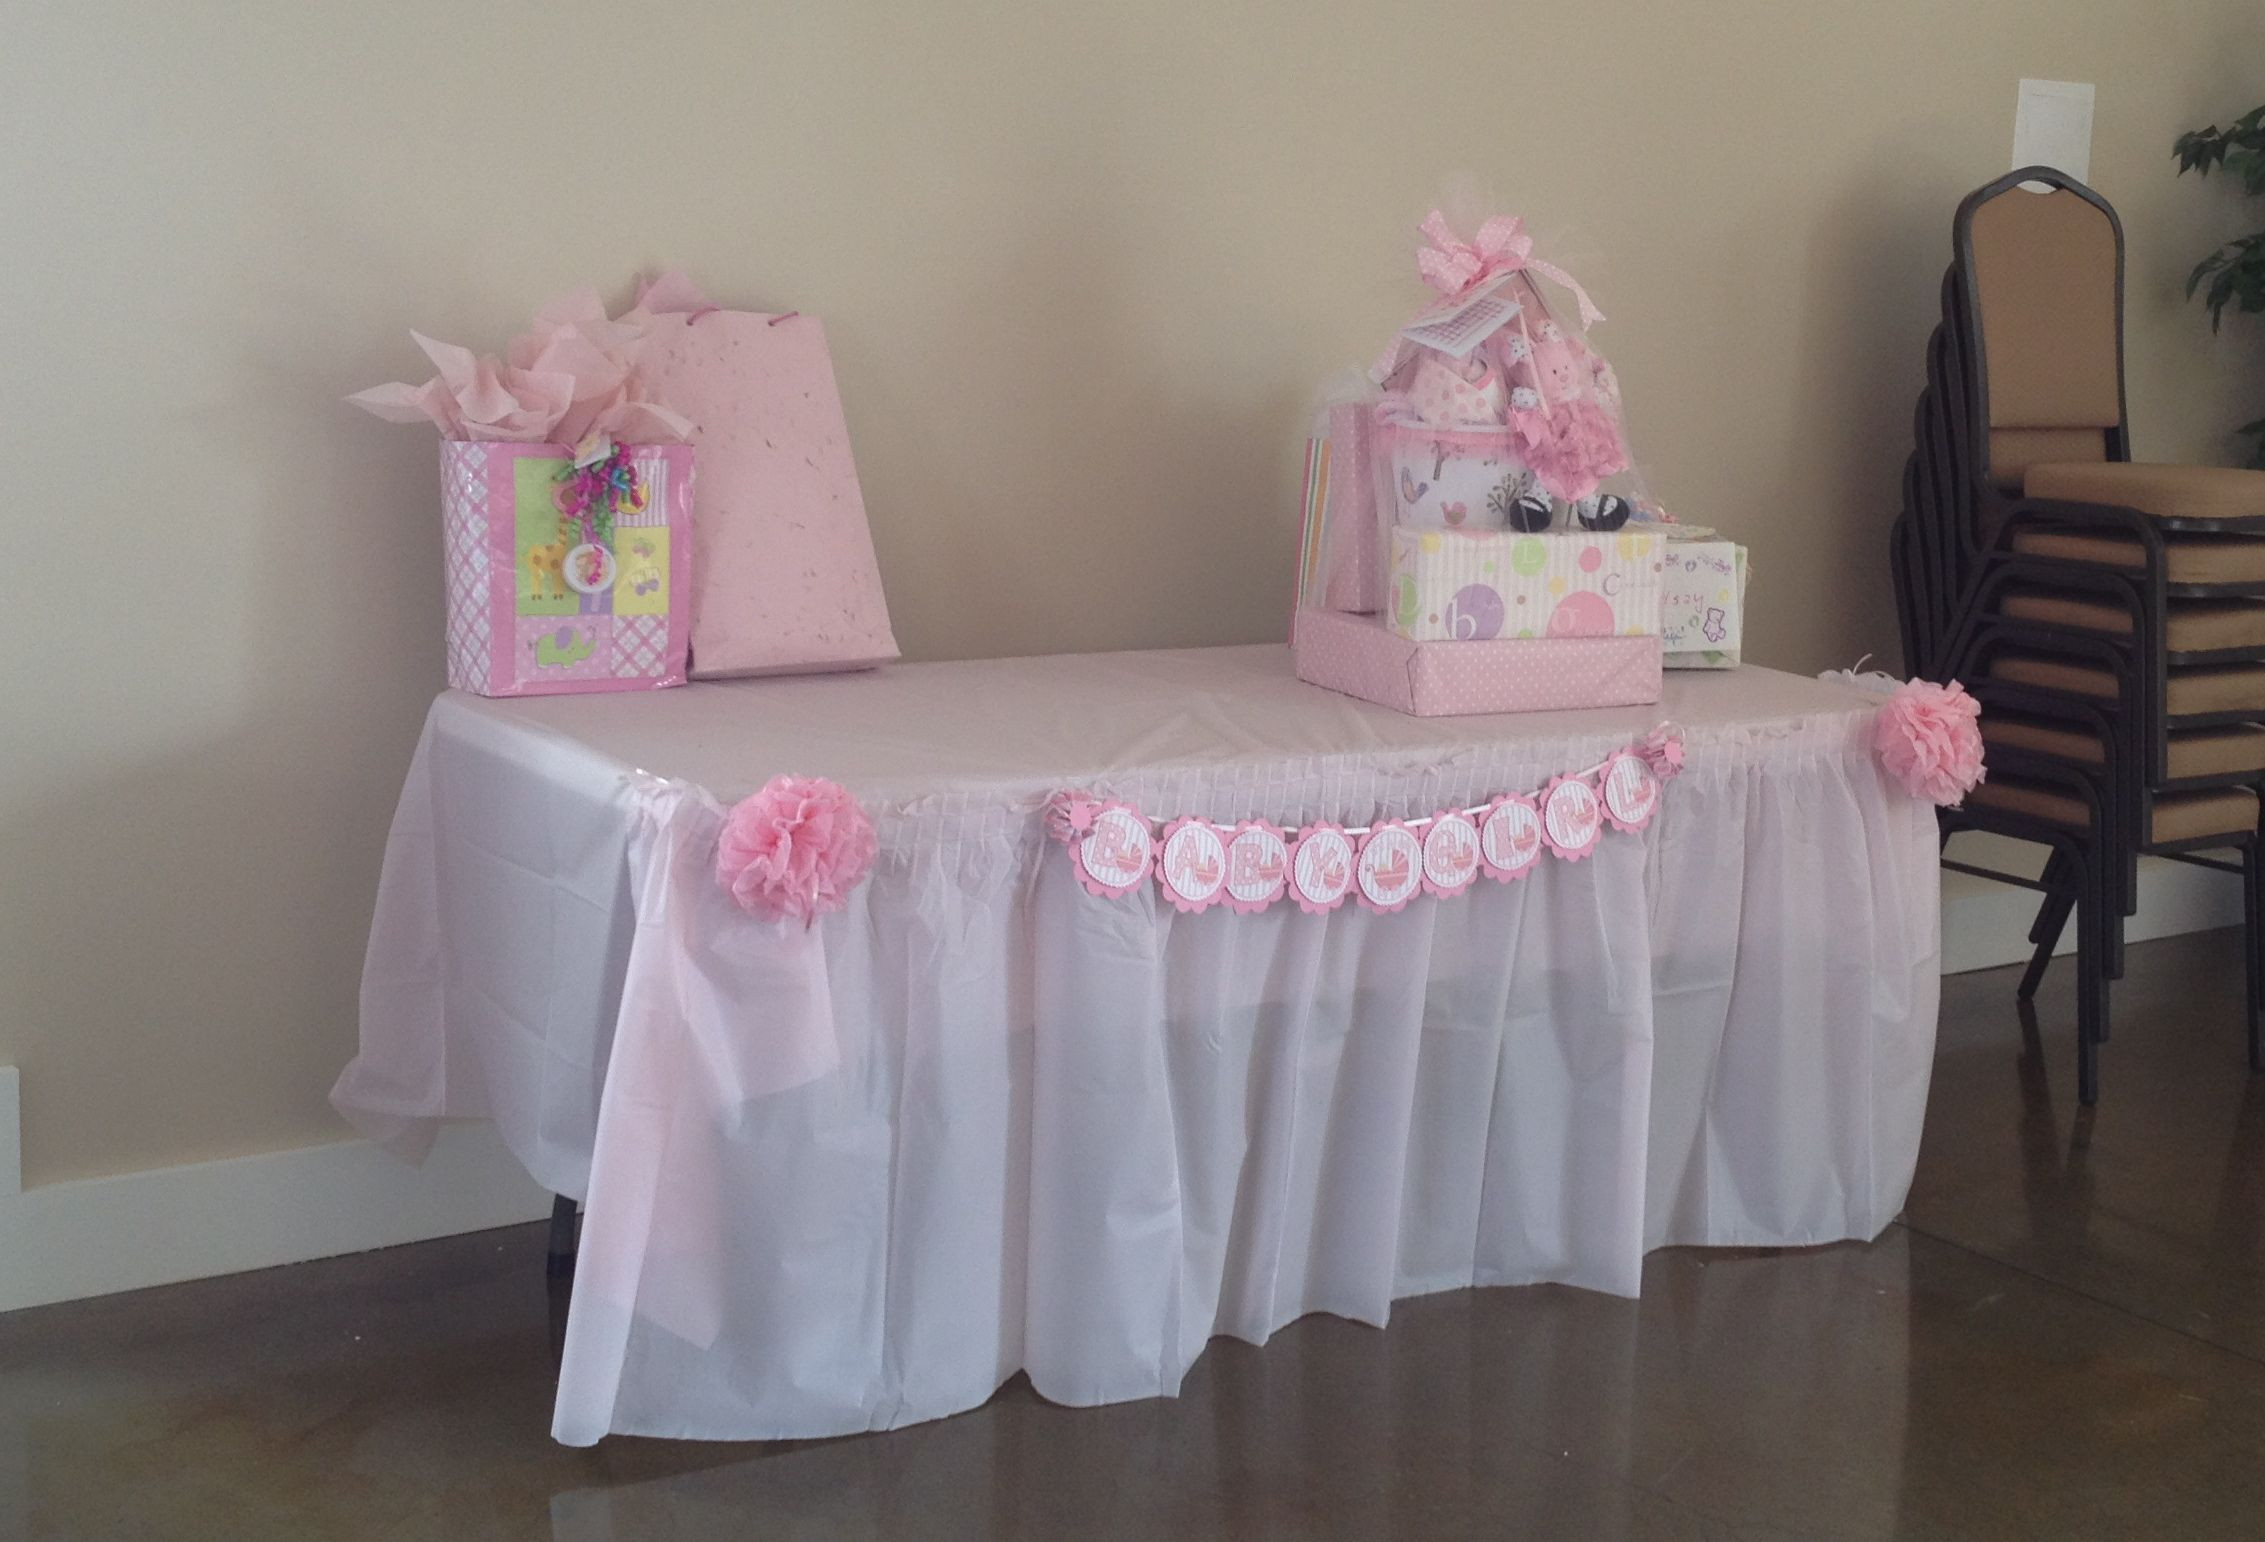 Gift Table Ideas For Baby Shower
 BABY SHOWER t table Our Events